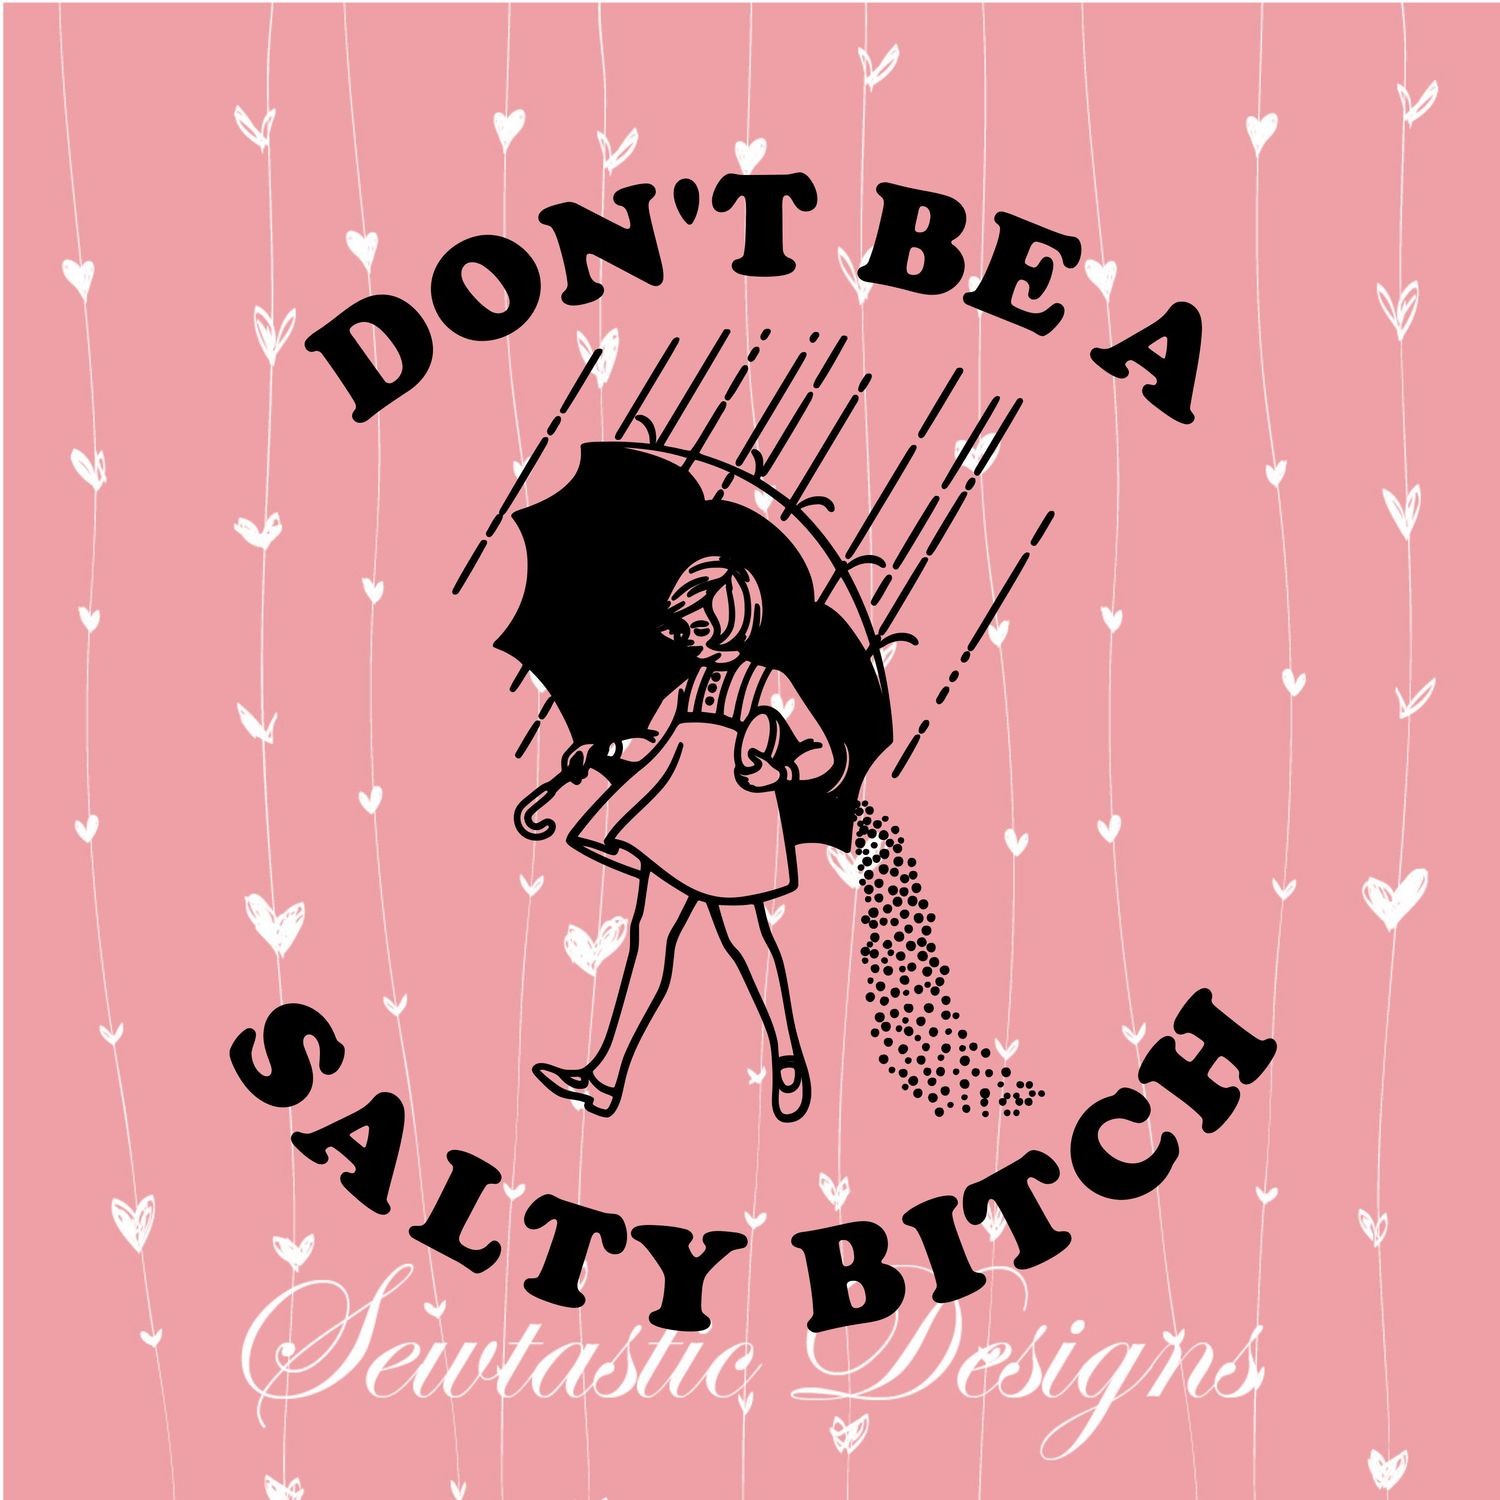 Don&#39;t Be A Salty Bitch, Salt SVG, Bitch SVG, Cut File, Iron On, Decal, Cricut, Silhouette, ScanNCut &amp; Many More